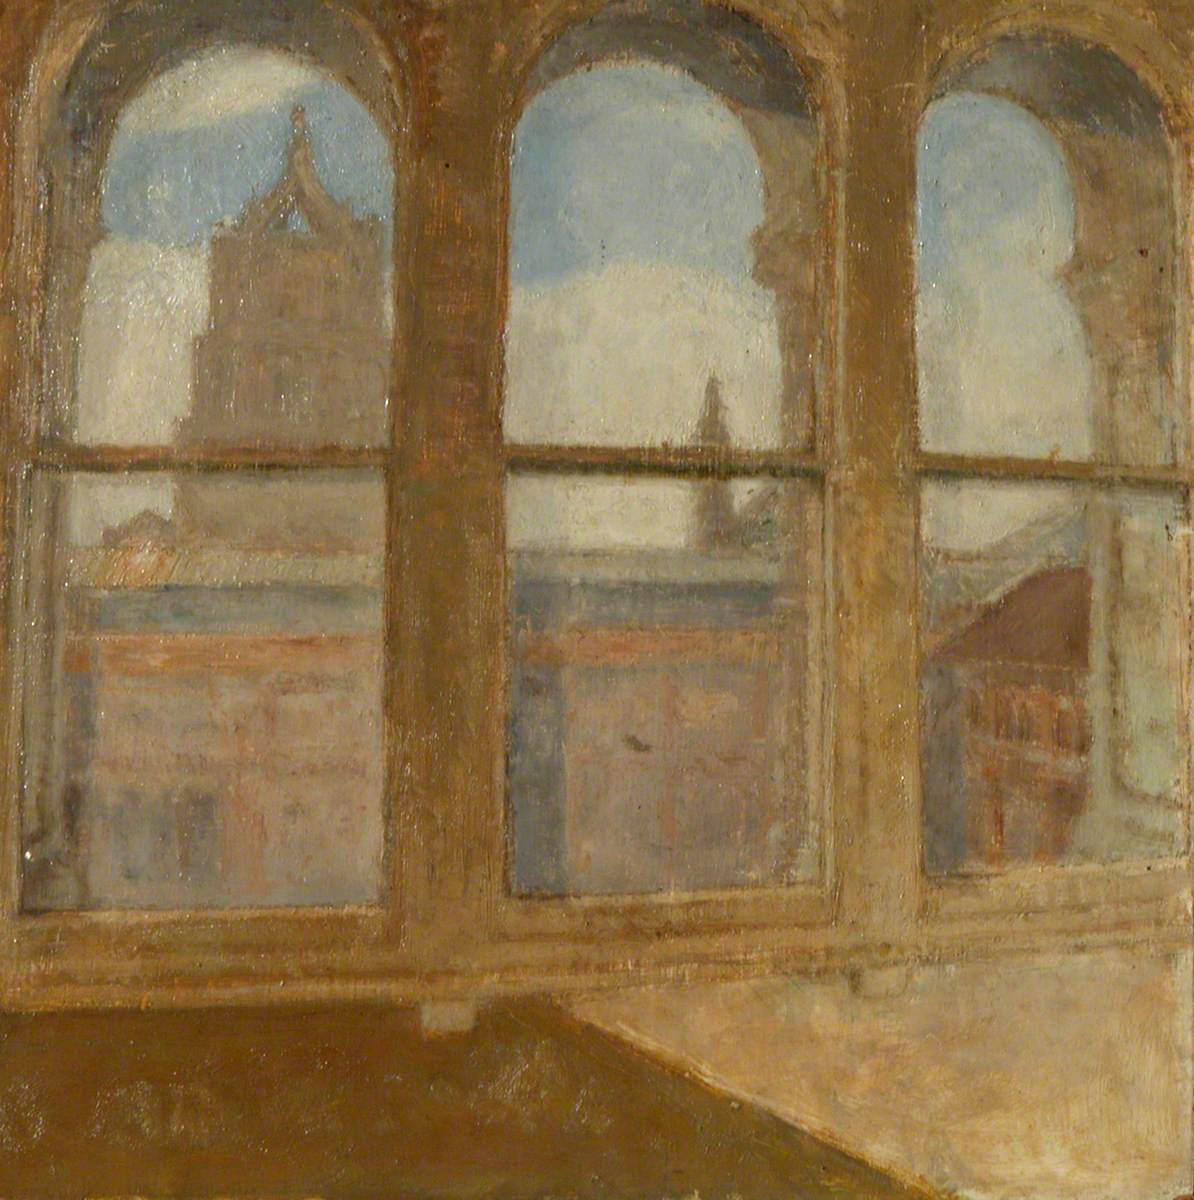 View of the Victoria and Albert Museum